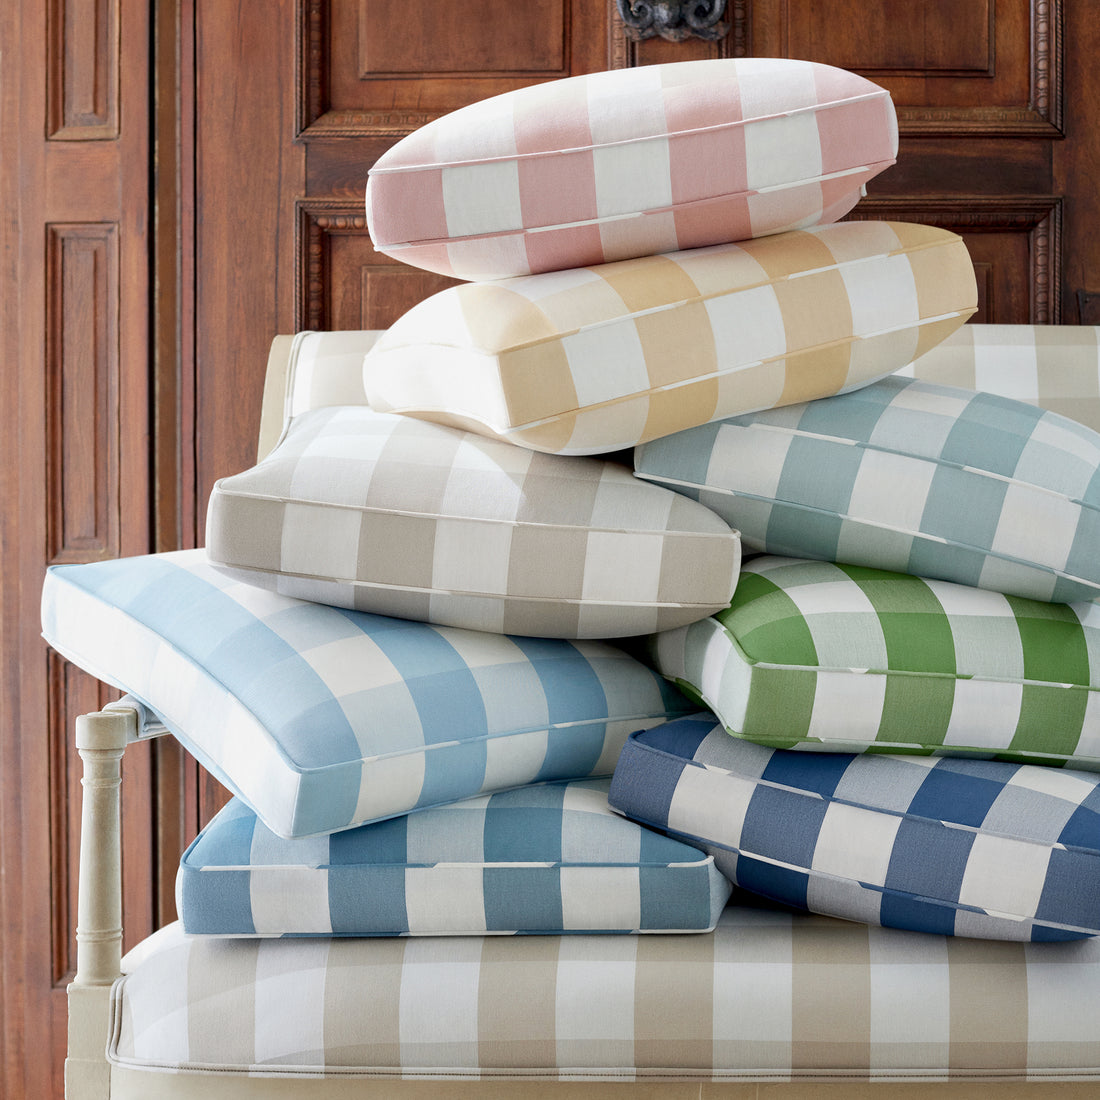 Pillows in Hammond Check woven fabric - pattern number AW24508 - by Anna French in the Devon collection